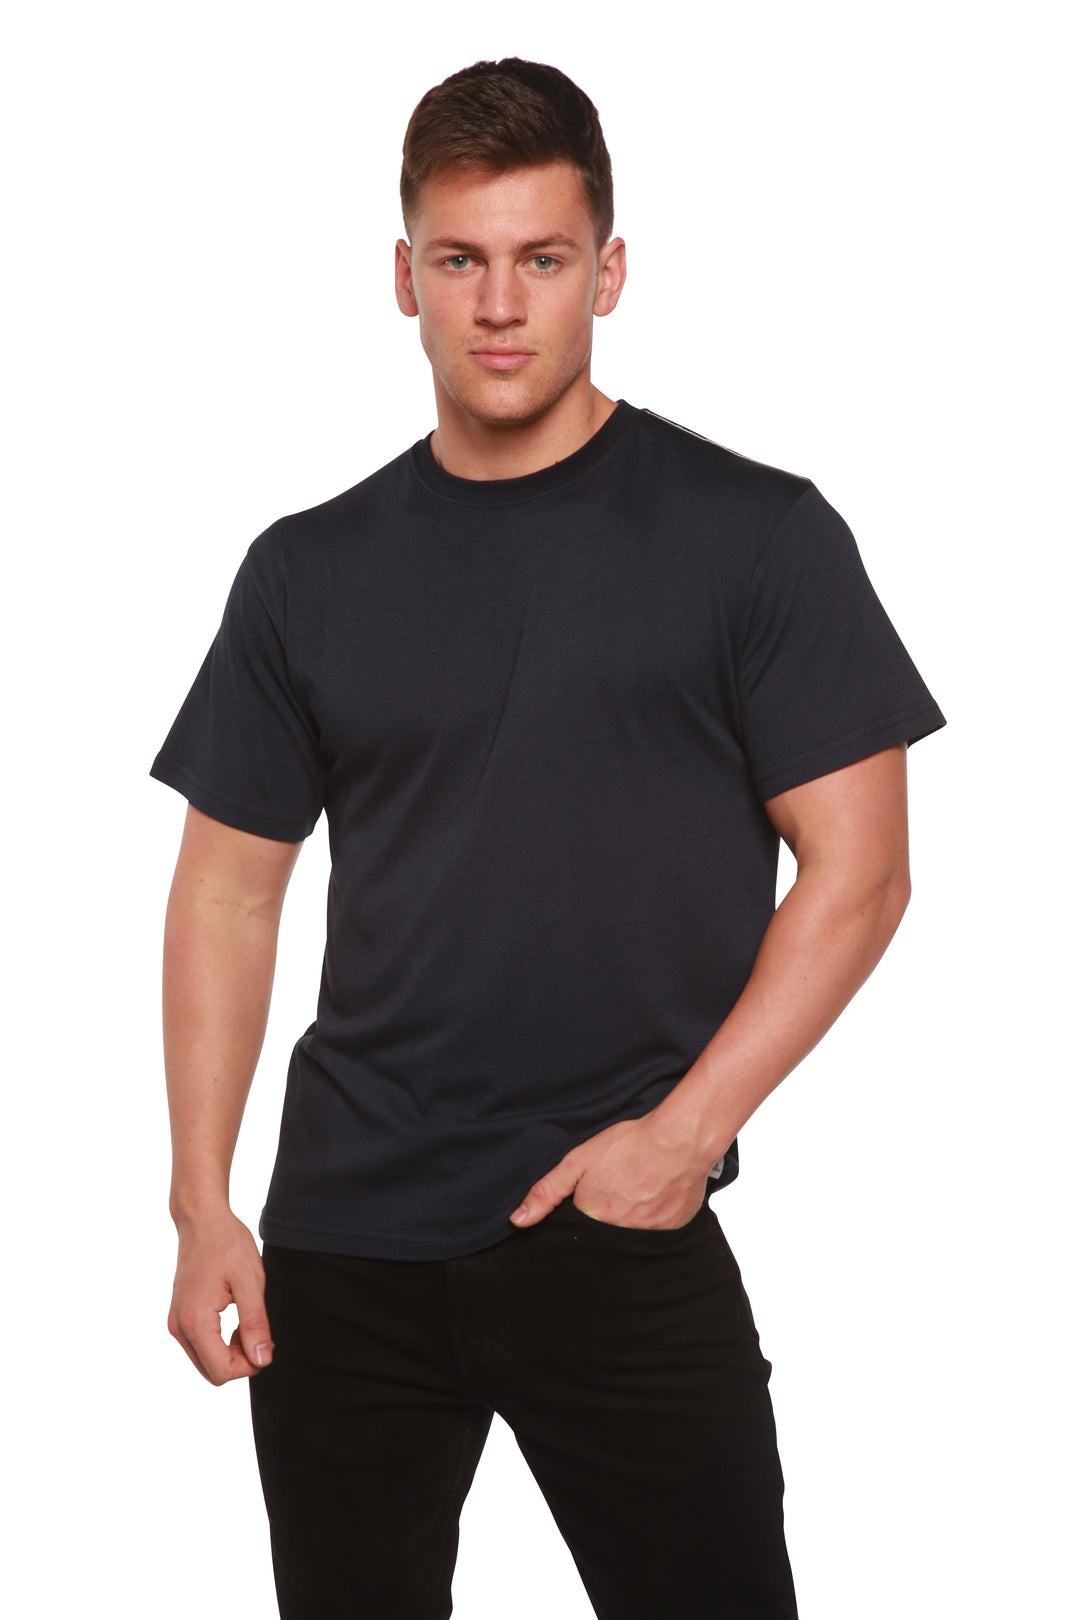 Mens Lightweight Bamboo Fiber Gray T Shirt With Letter Jacquard And Crew  Neck 38.8% Cotton And 45.9% Beads, Short Sleeve Solid Color Tee Shirt Top  From Tuesdayfasy, $26.98